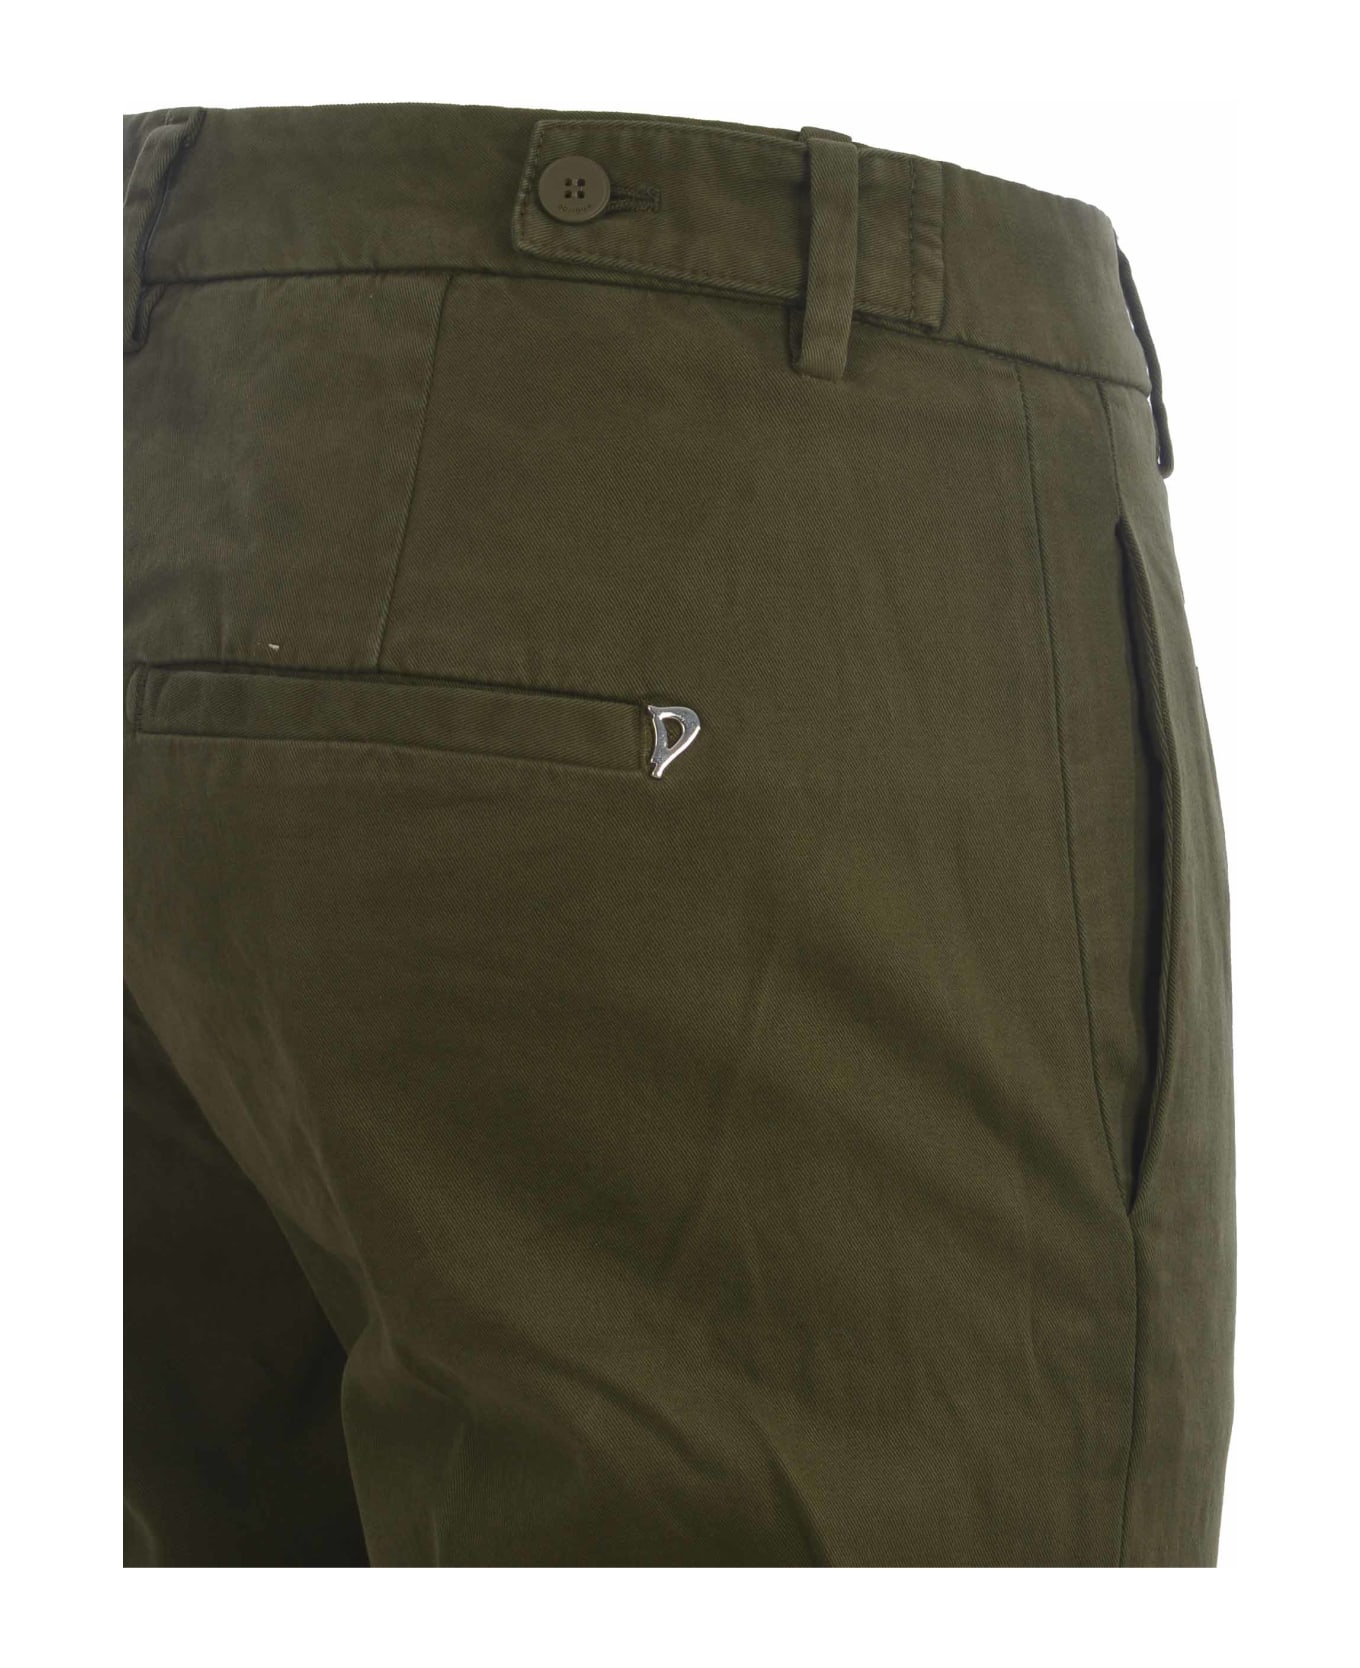 Dondup Trousers "ariel 27 Inches" In Stretch Cotton - Verde militare ボトムス